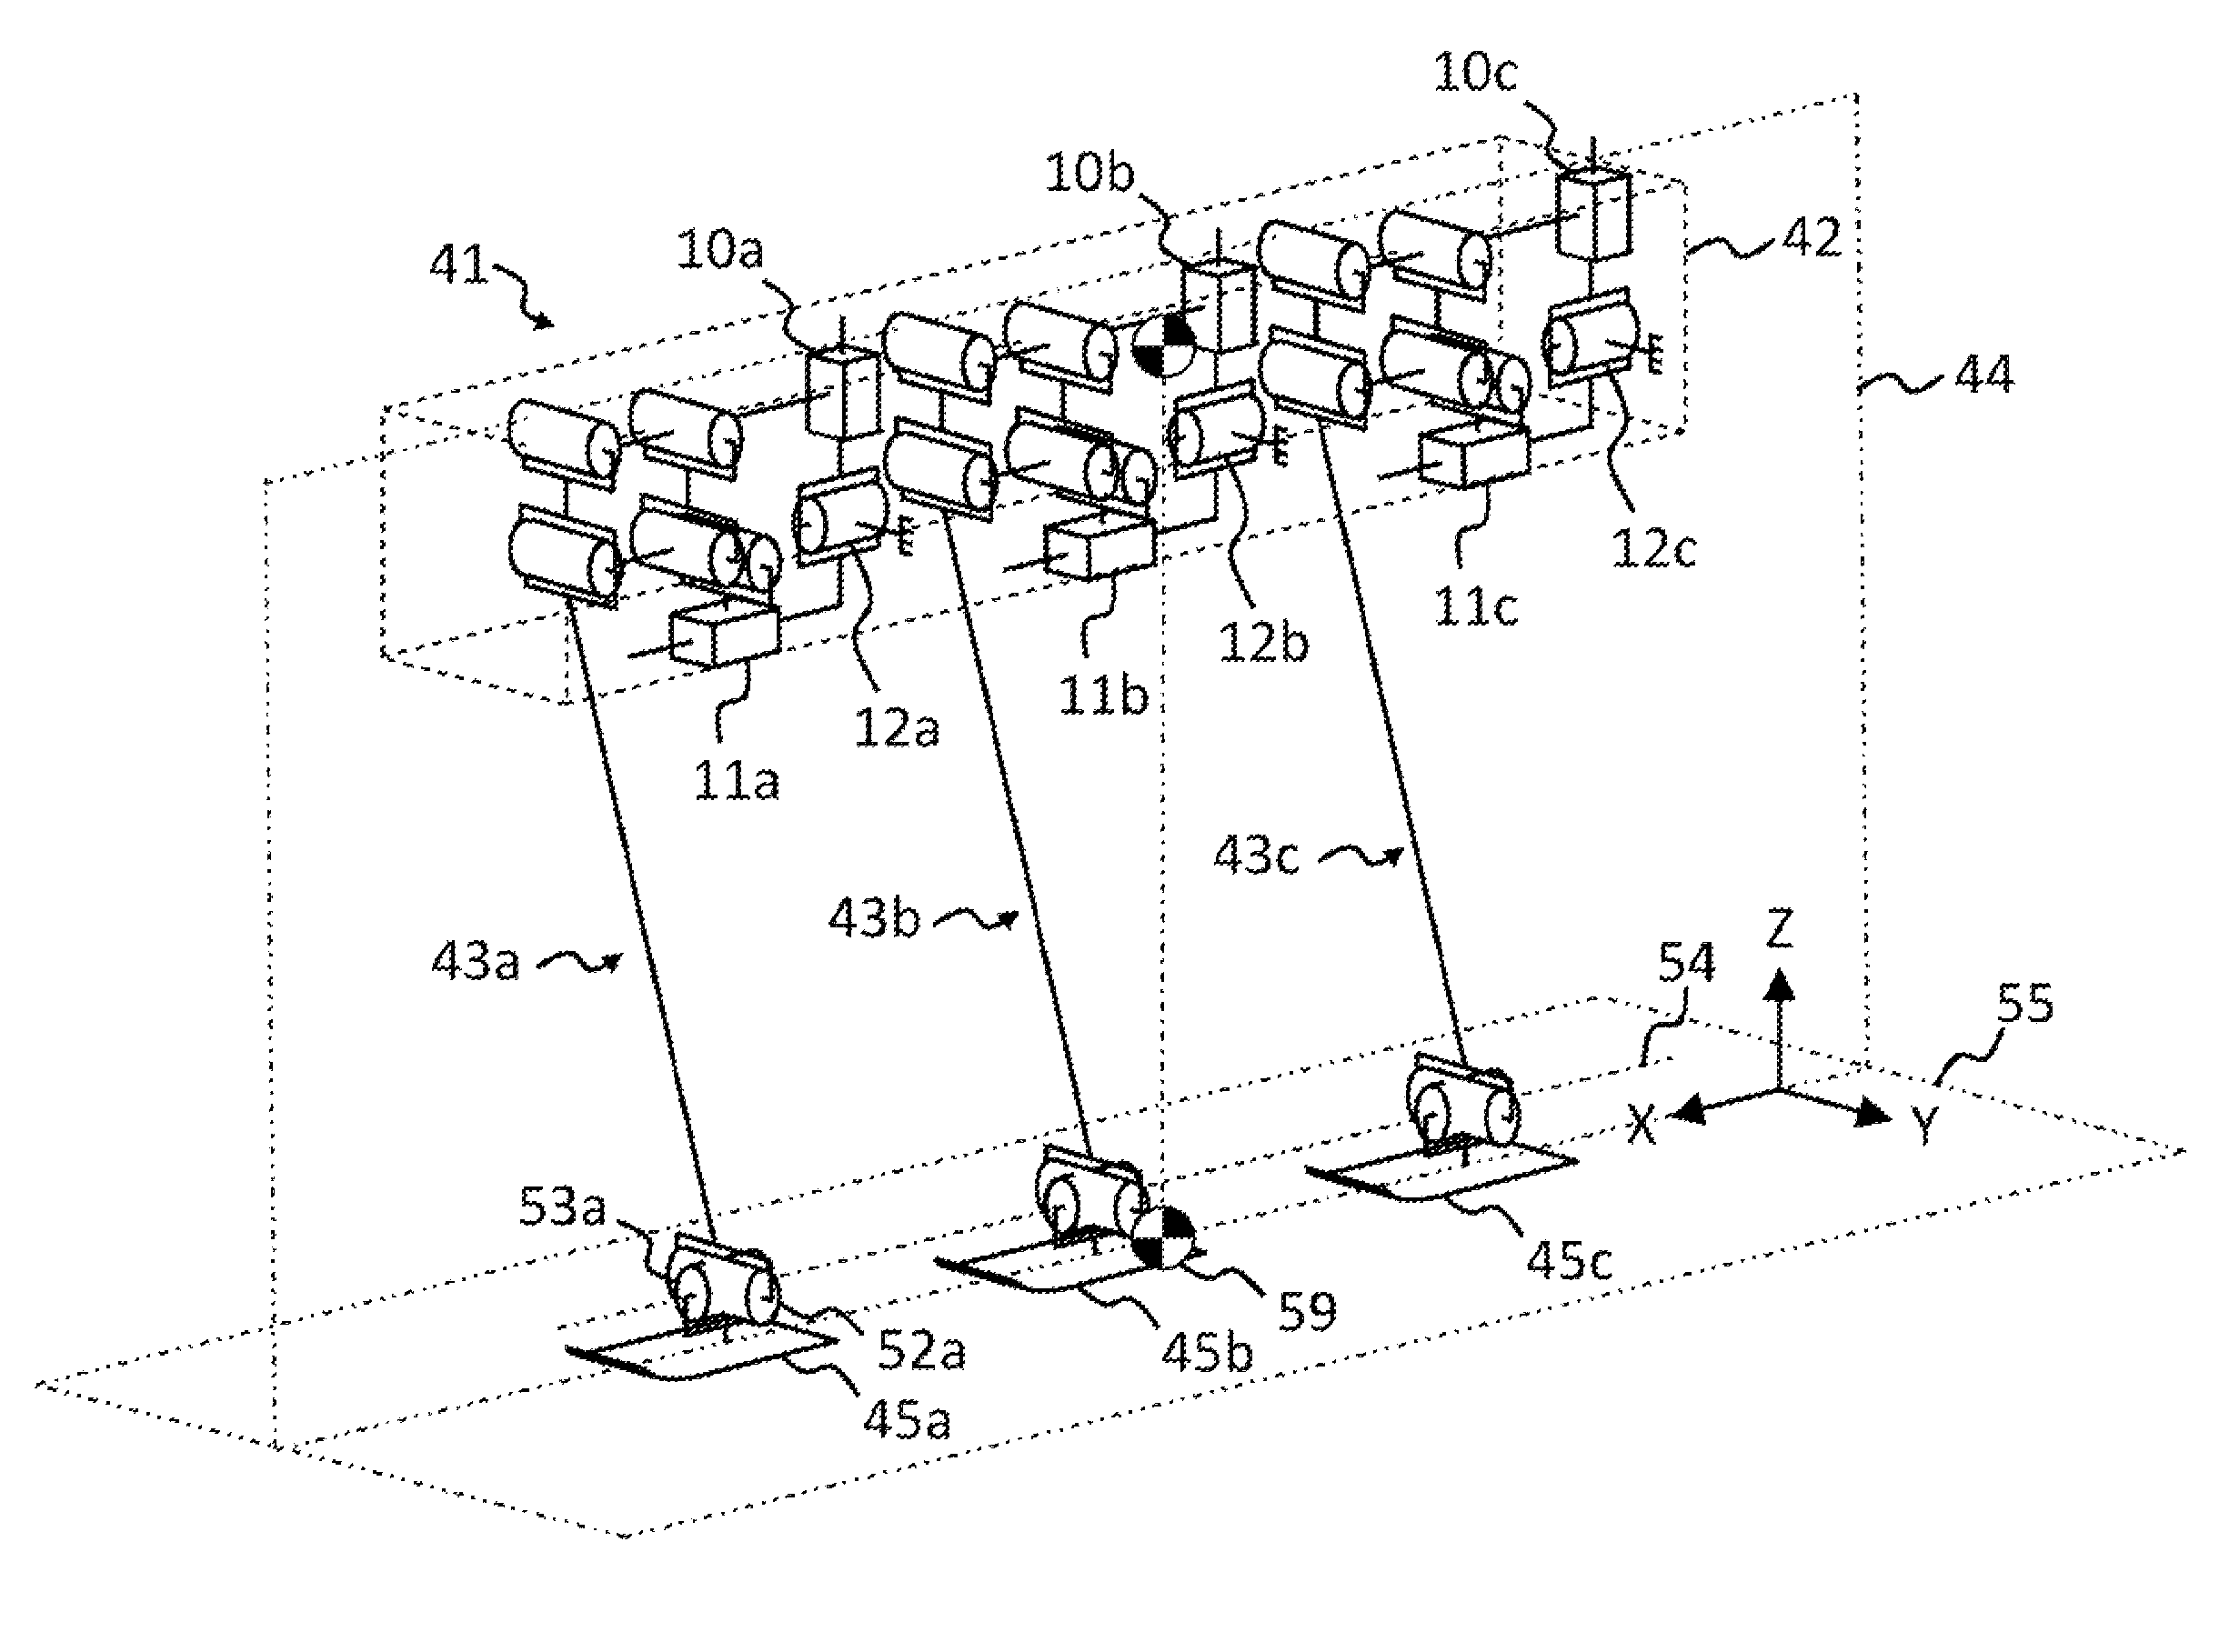 In-line legged robot vehicle and method for operating